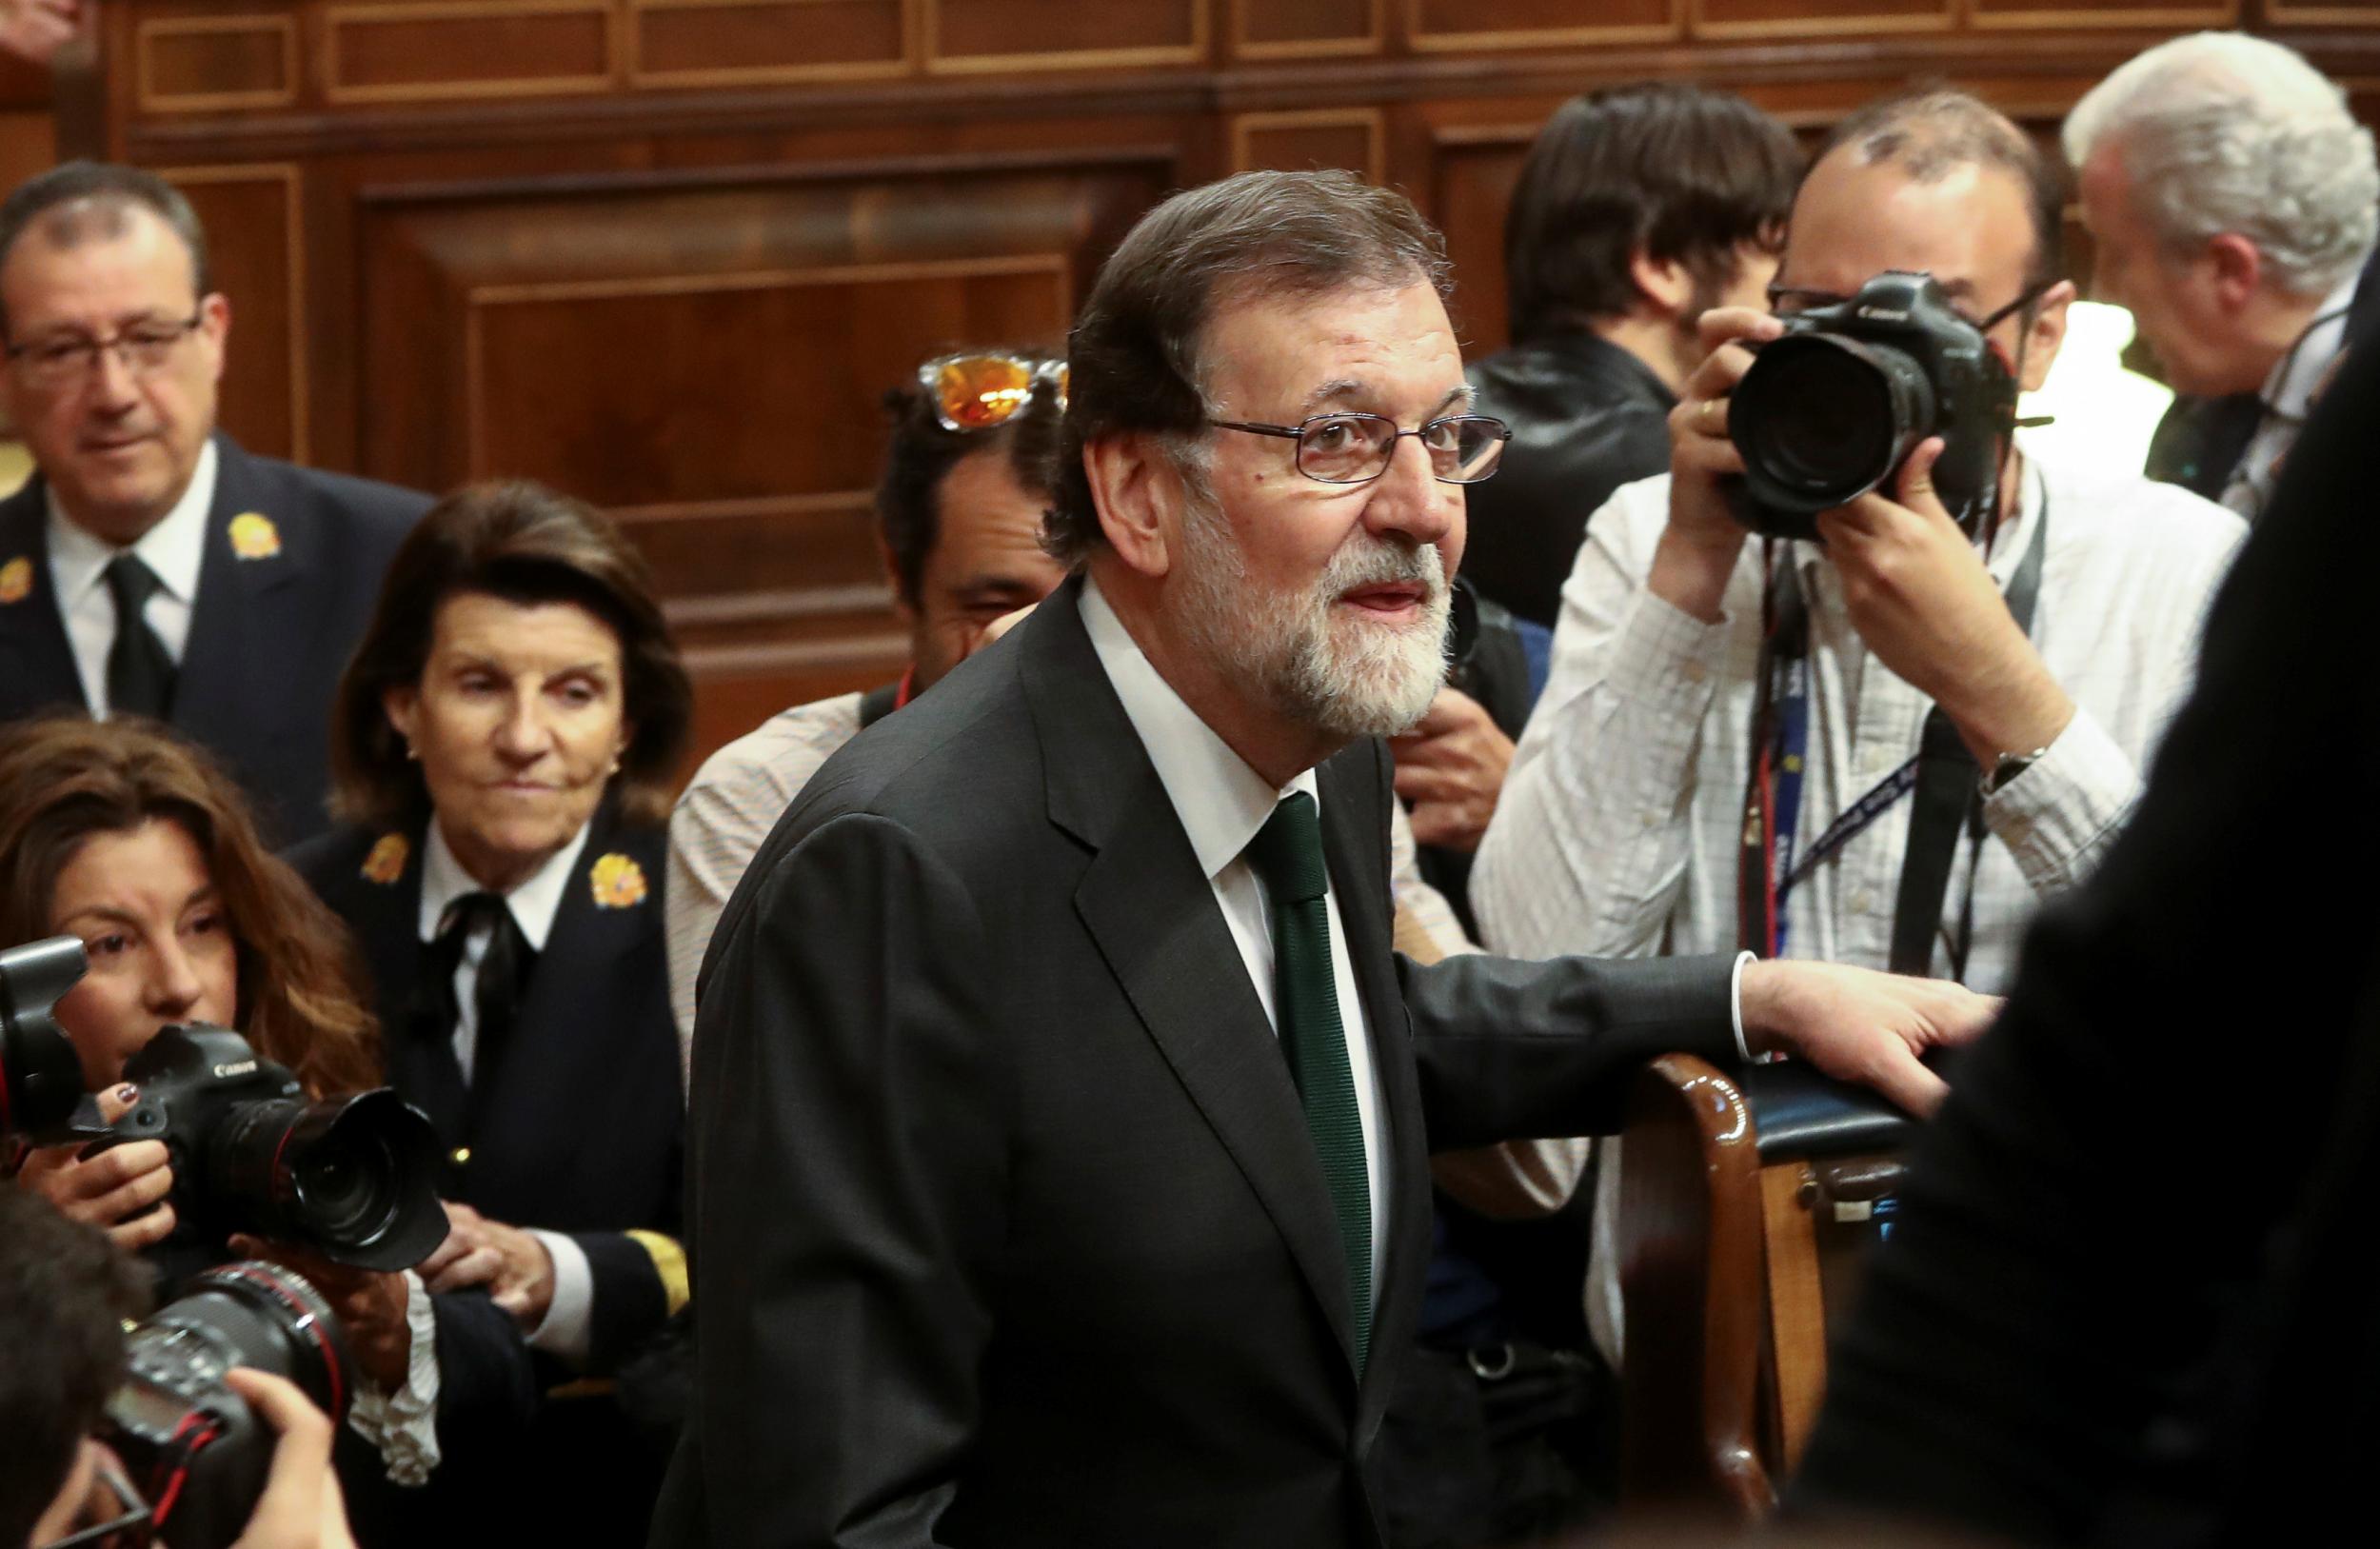 The Spanish prime minister, Mariano Rajoy, was ousted on Friday in the wake of a corruption scandal